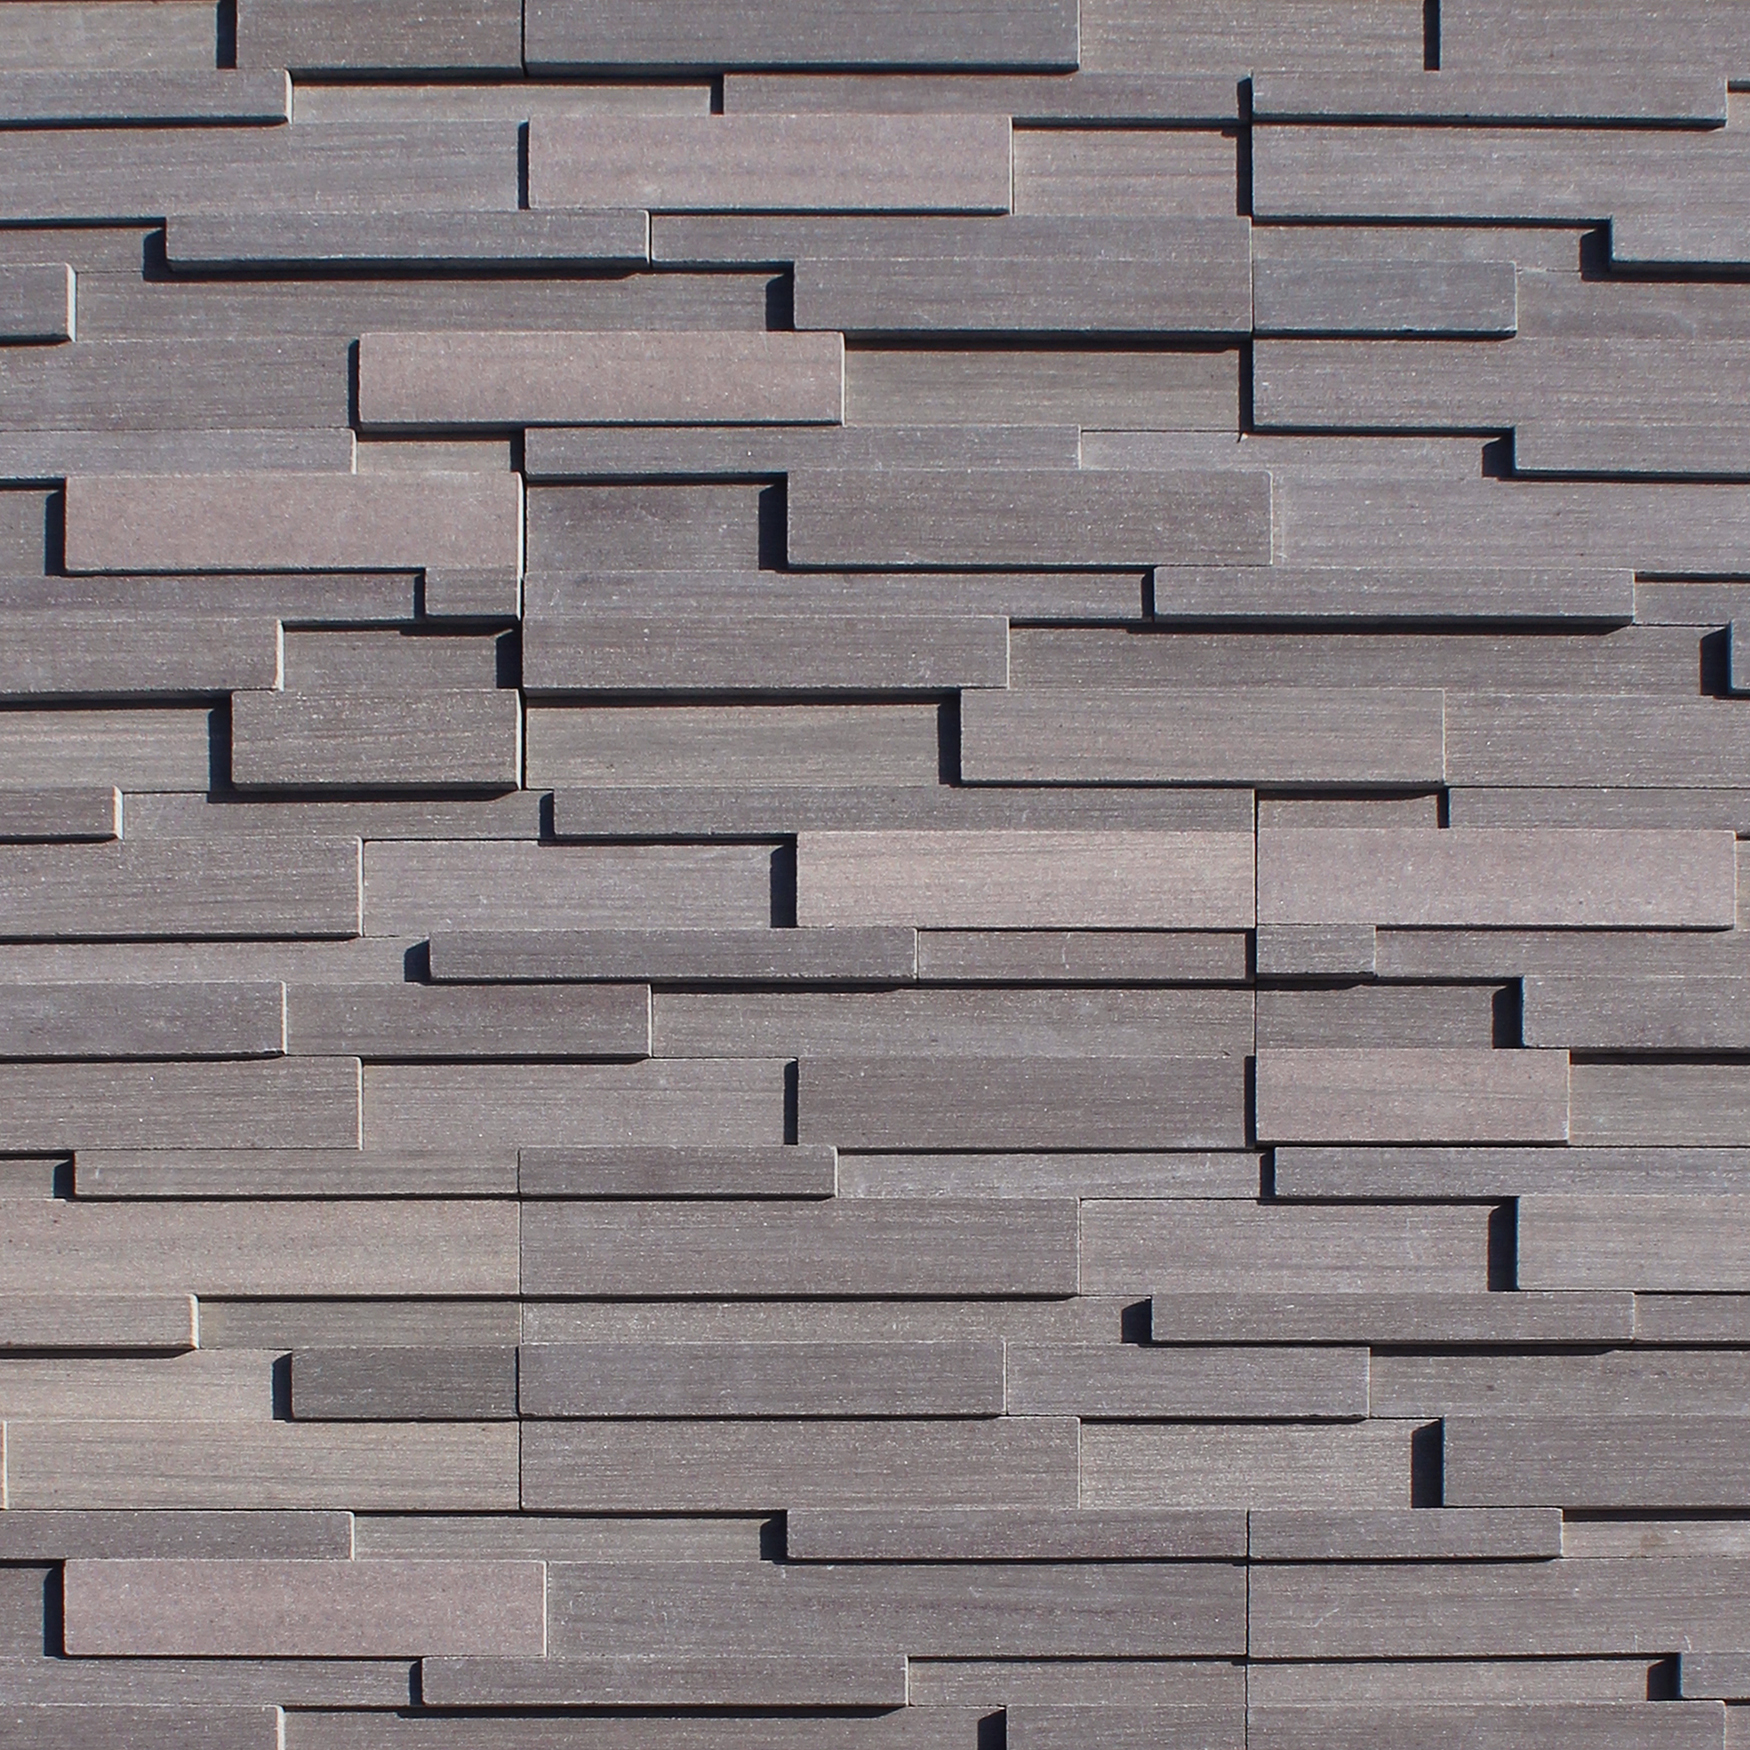 Citali Series Coco 6 x 24 Natural Stacked Stone Panel